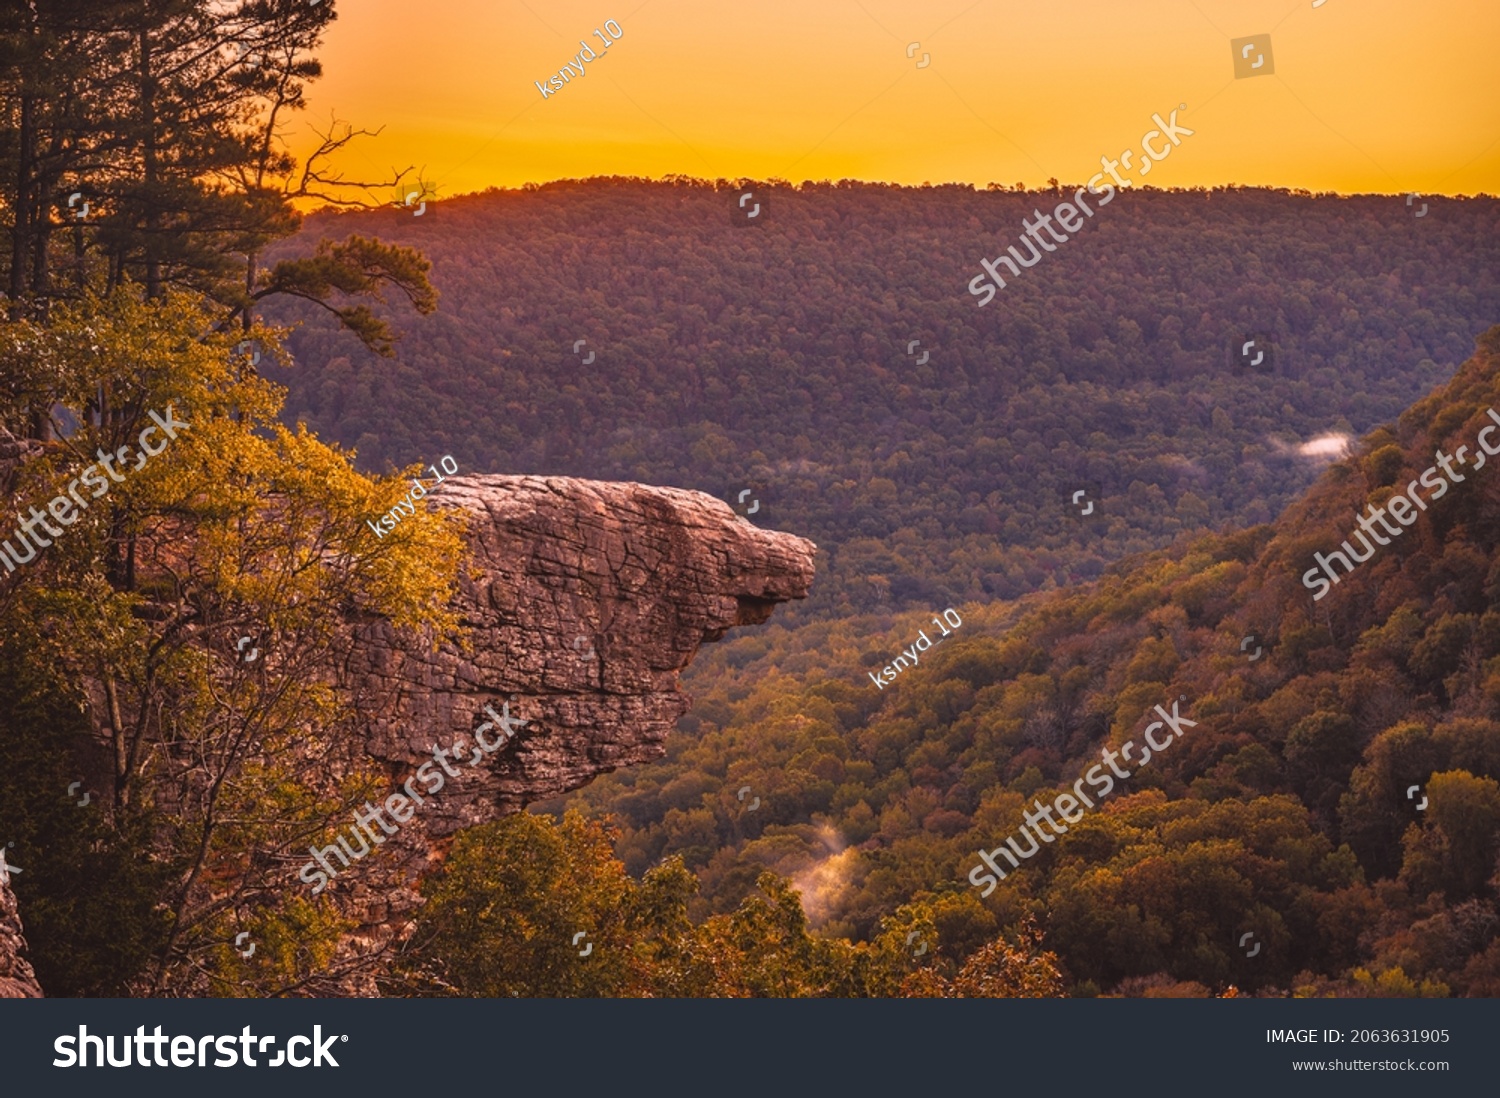 Sunrise at Whitaker Point, known as Hawksbill Crag, during the fall color change of the leaves. Hawksbill is a popular tourist site in the state of Arkansas. #2063631905